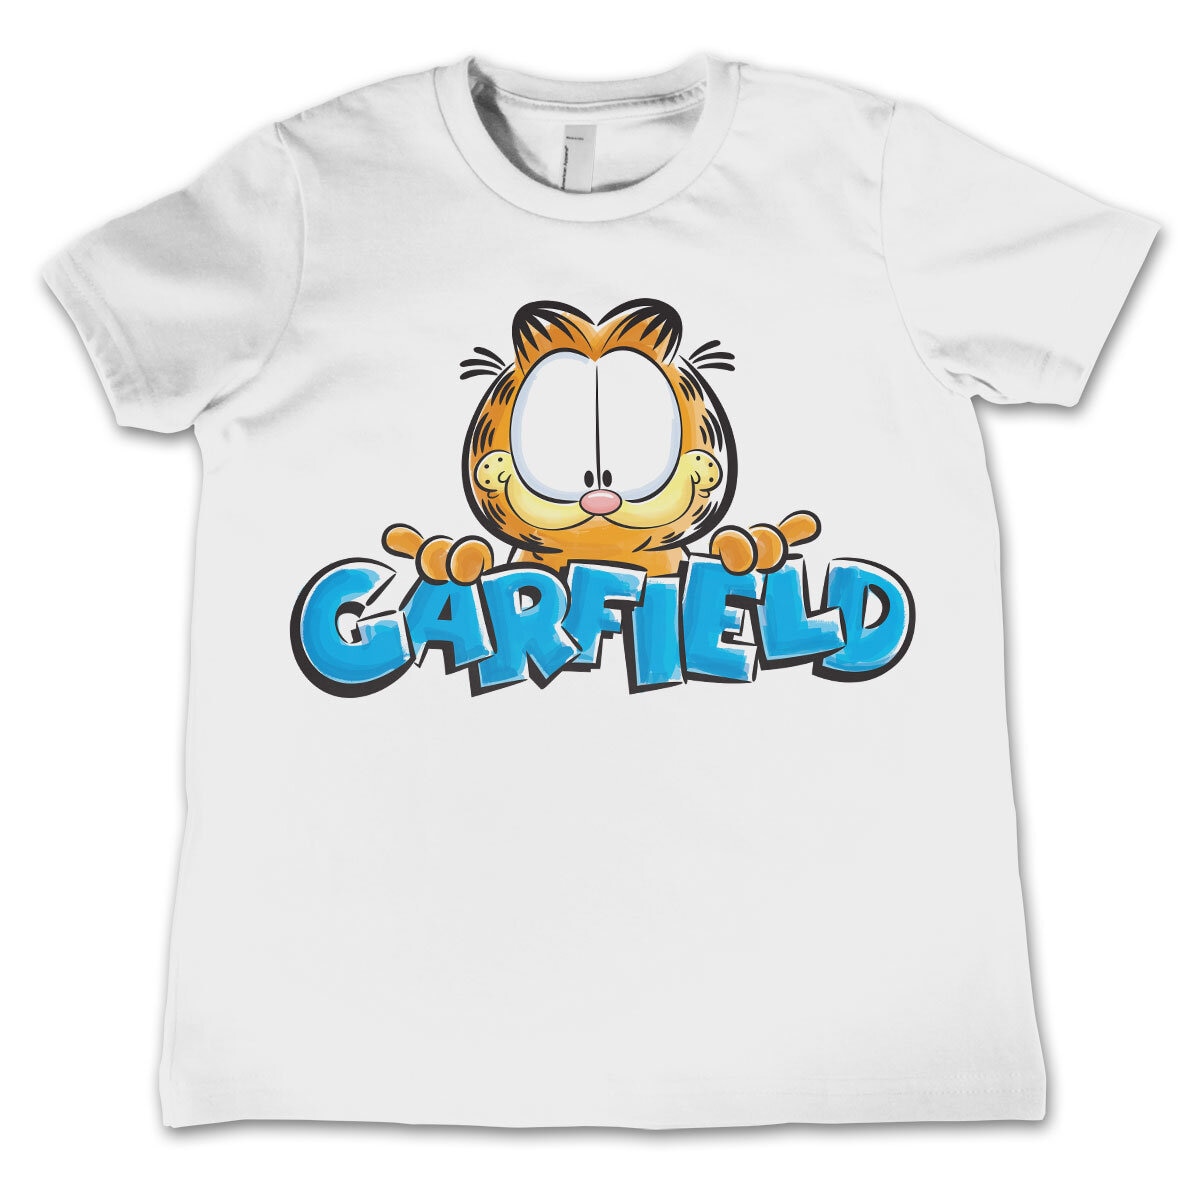 Garfield Scetched Kids T-Shirt